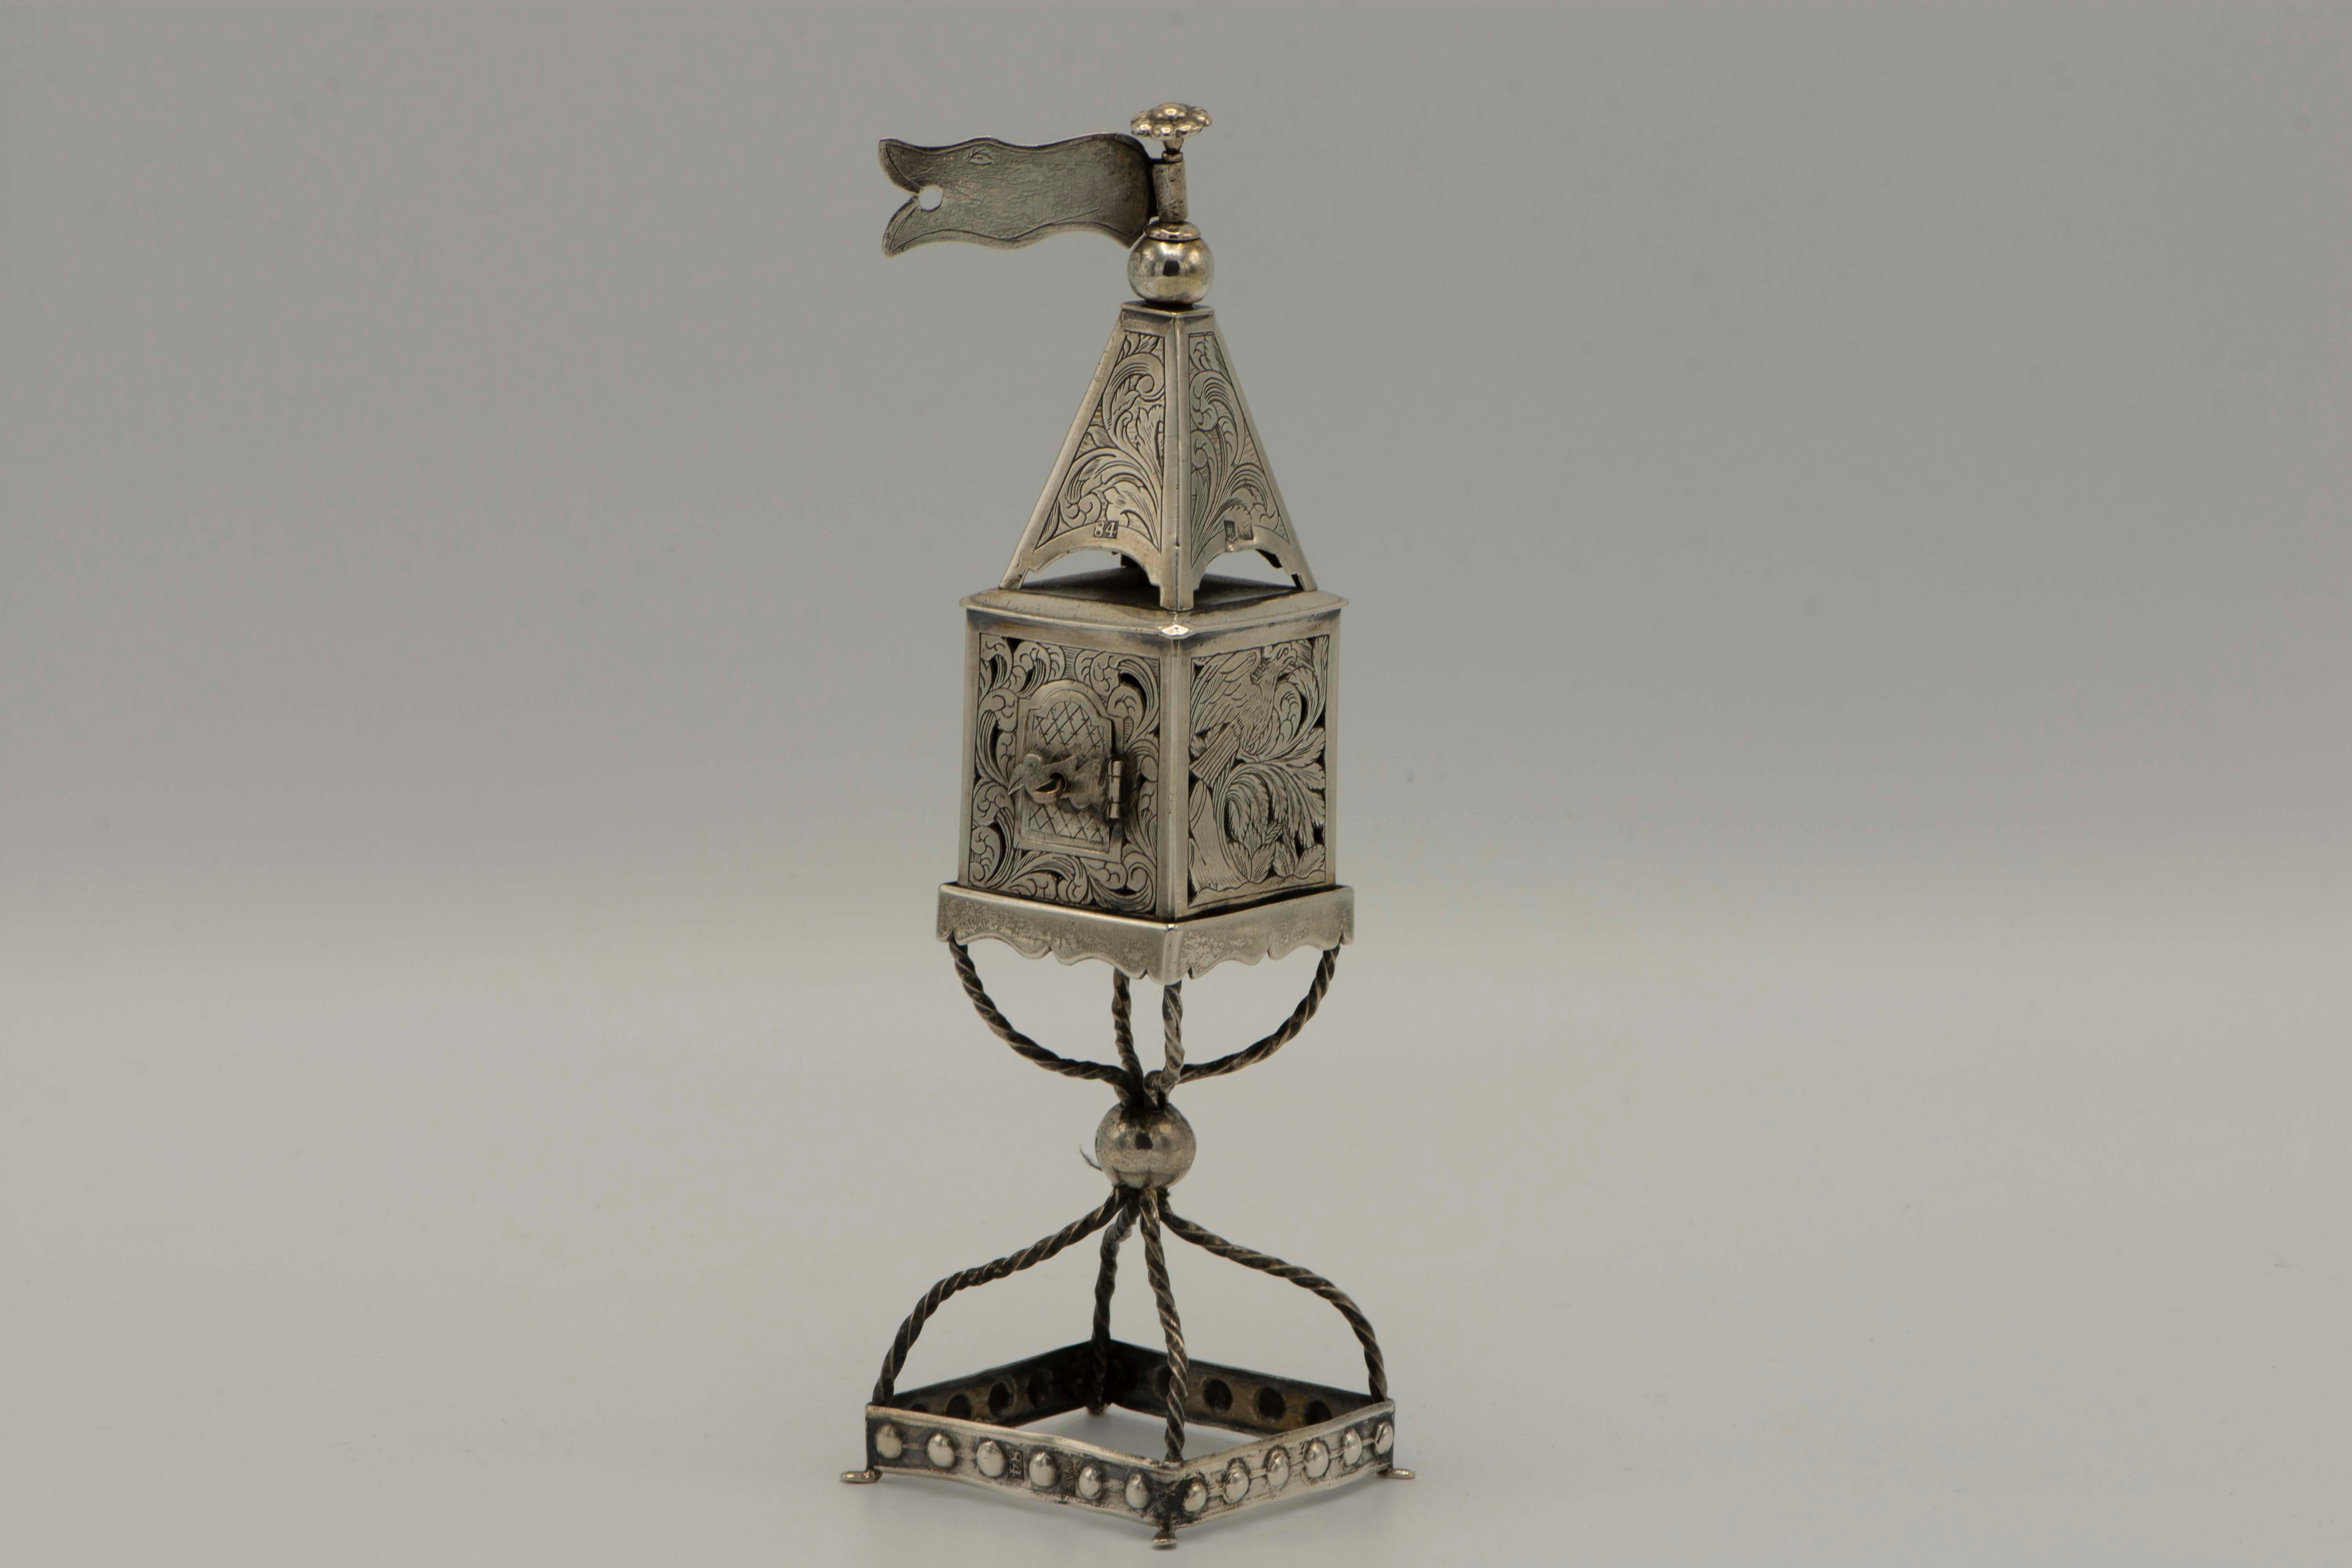 Handmade silver spice tower, Minsk, Russian Empire, 1878.
Beautifully engraved with eagle, ox, and lion amongst foliage, the spice box has a hinged door shaped as a bird, resting on wirework stem.
Marked on body door, dome, and foot.

Every item